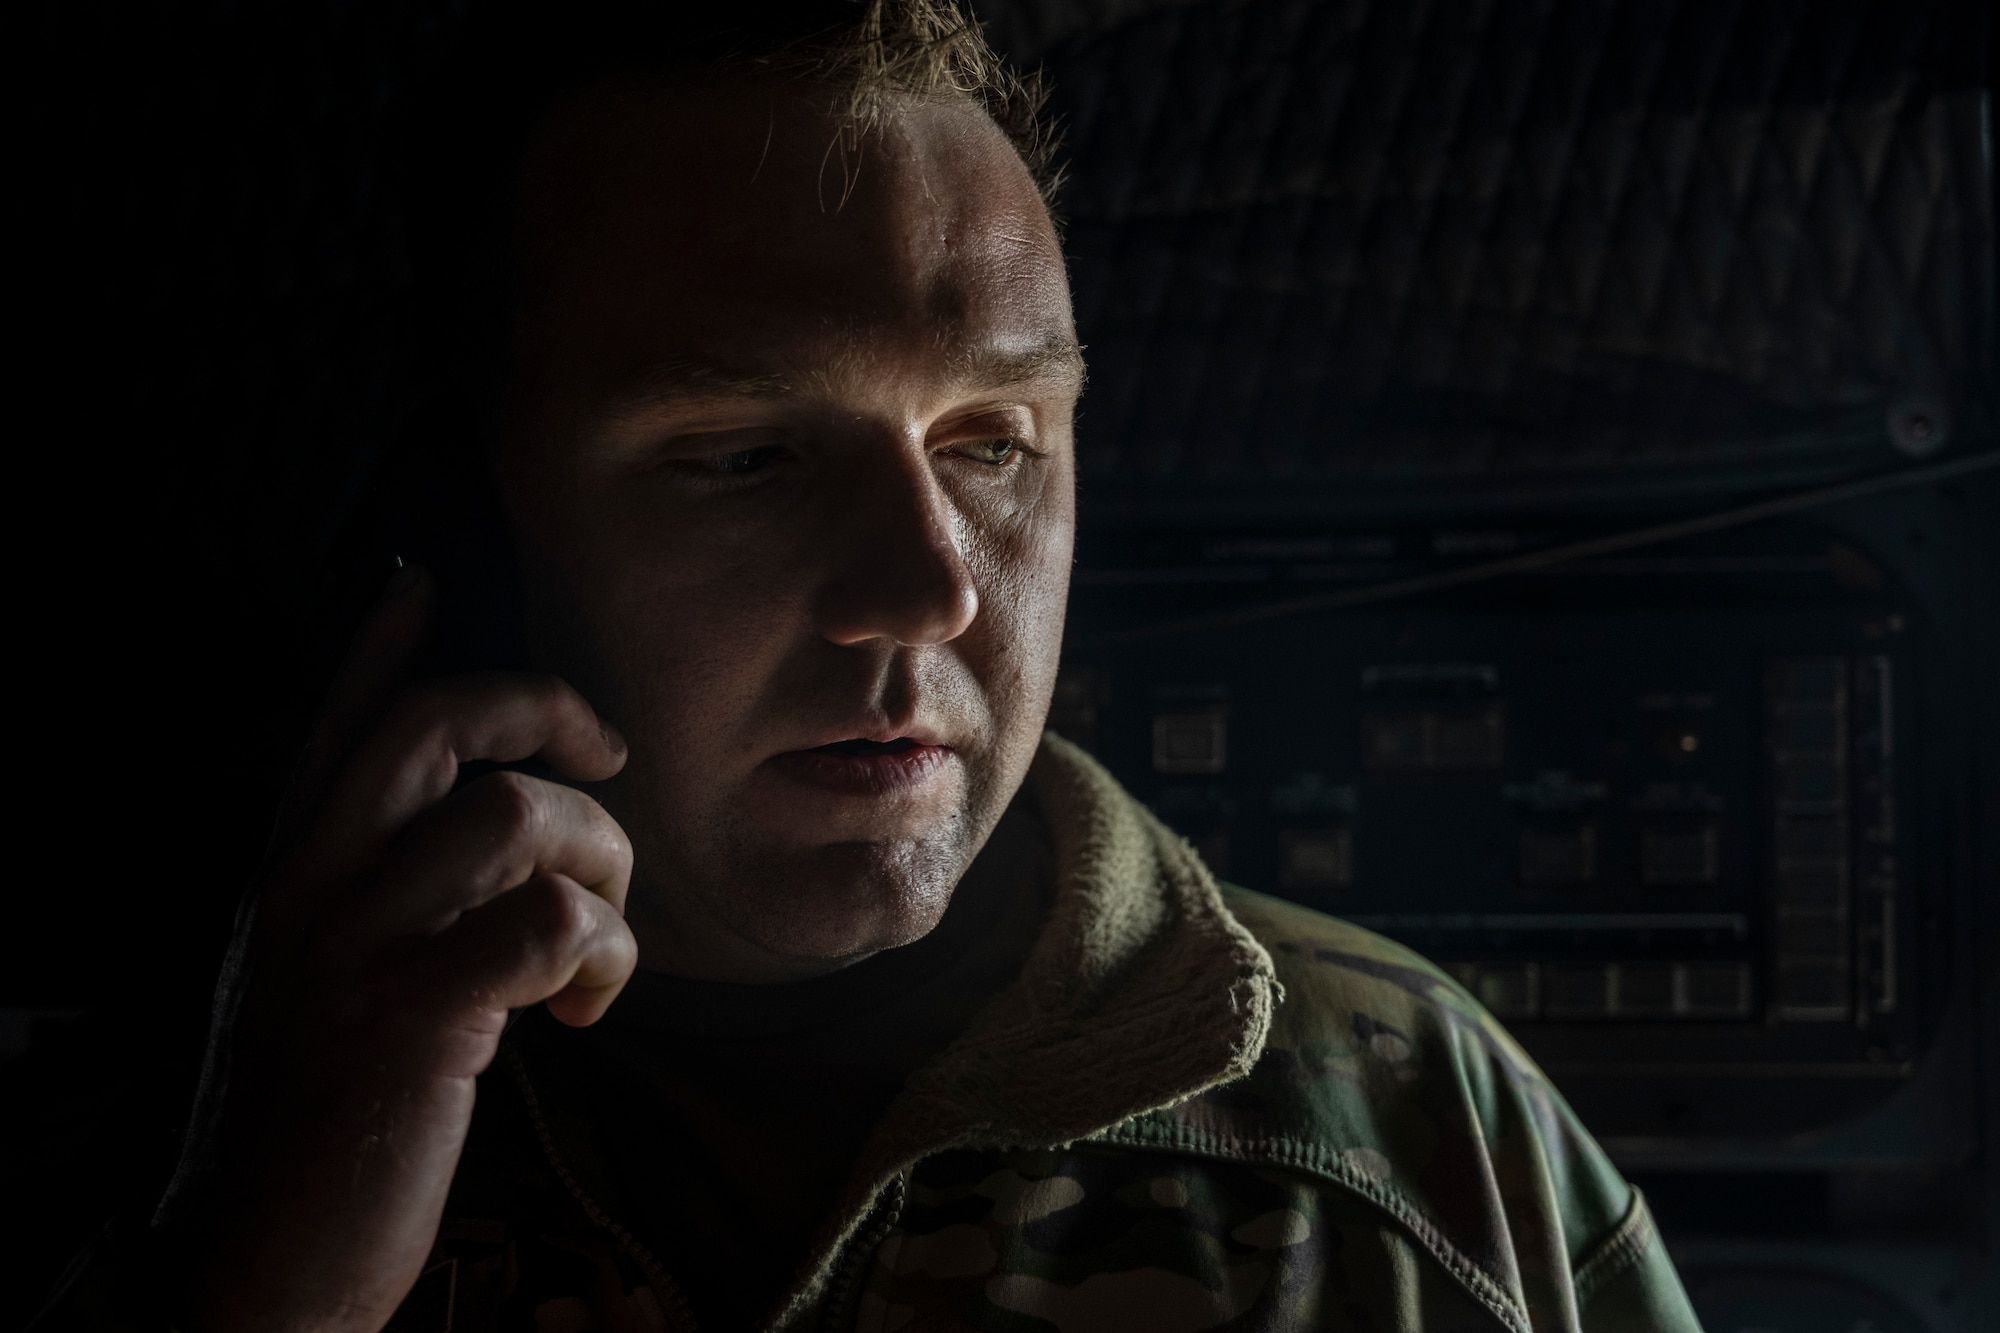 A portrait of a man in military uniform on the phone.